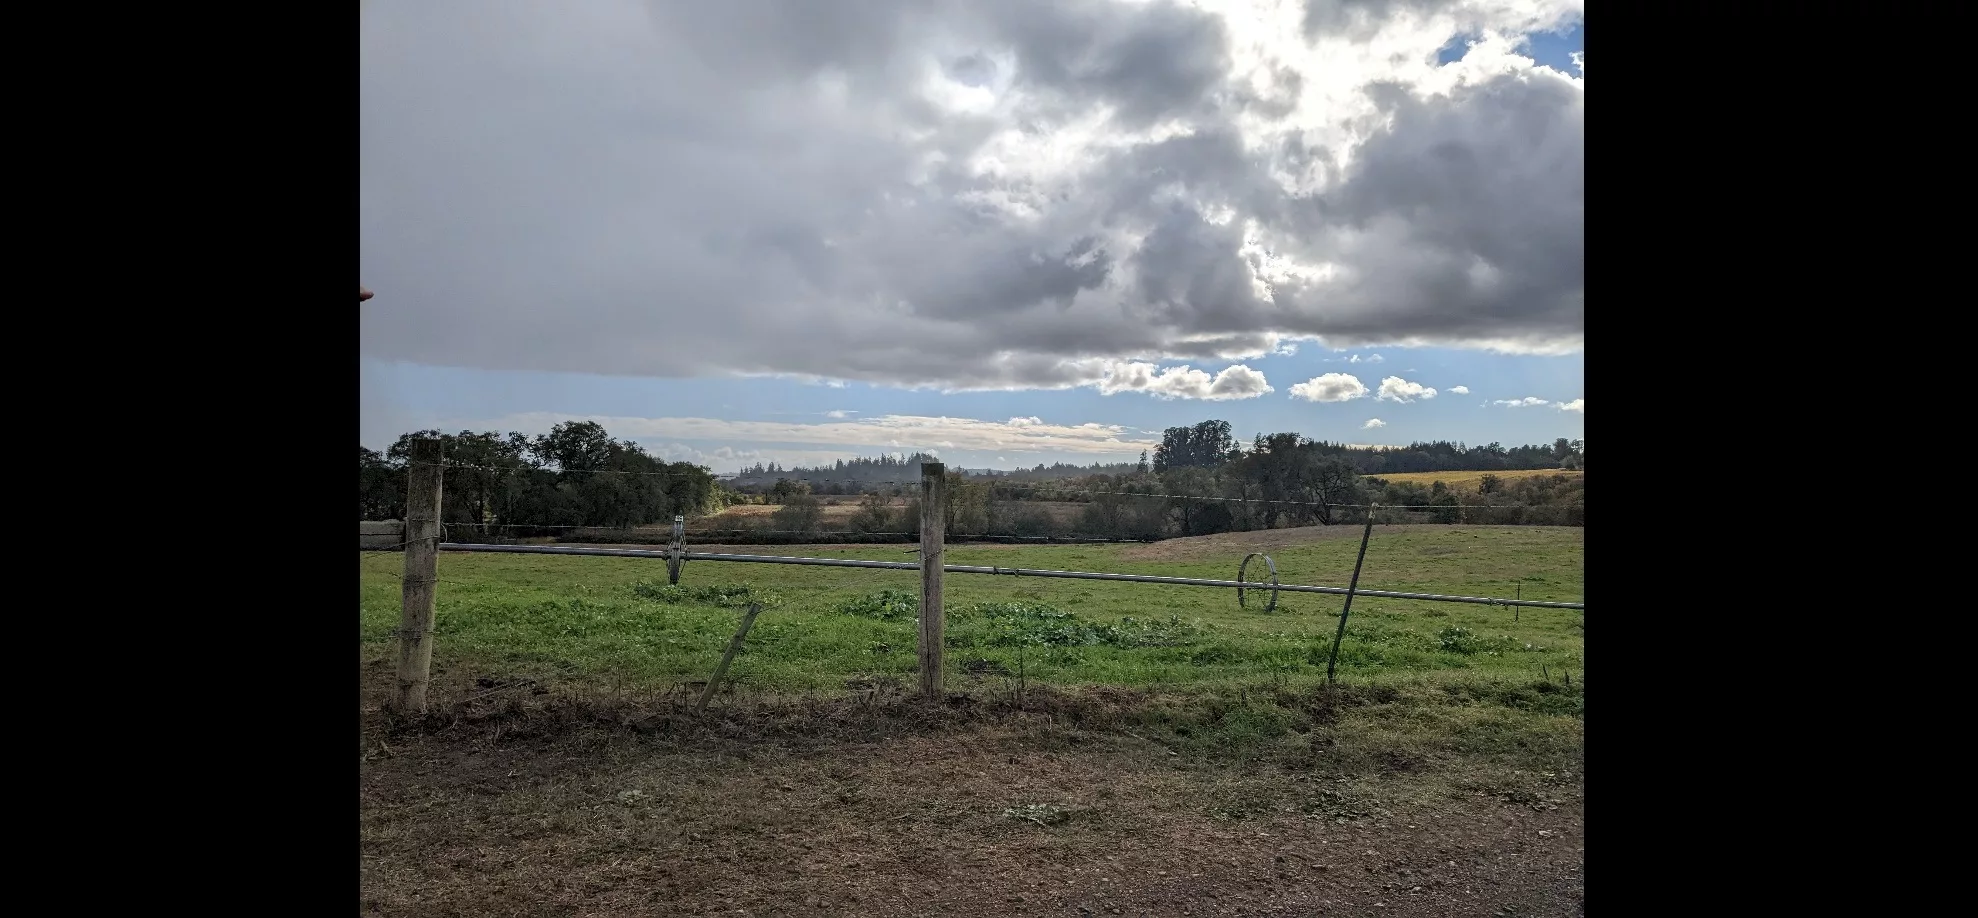 denner-ranch-sonoma-county-ag-open-space